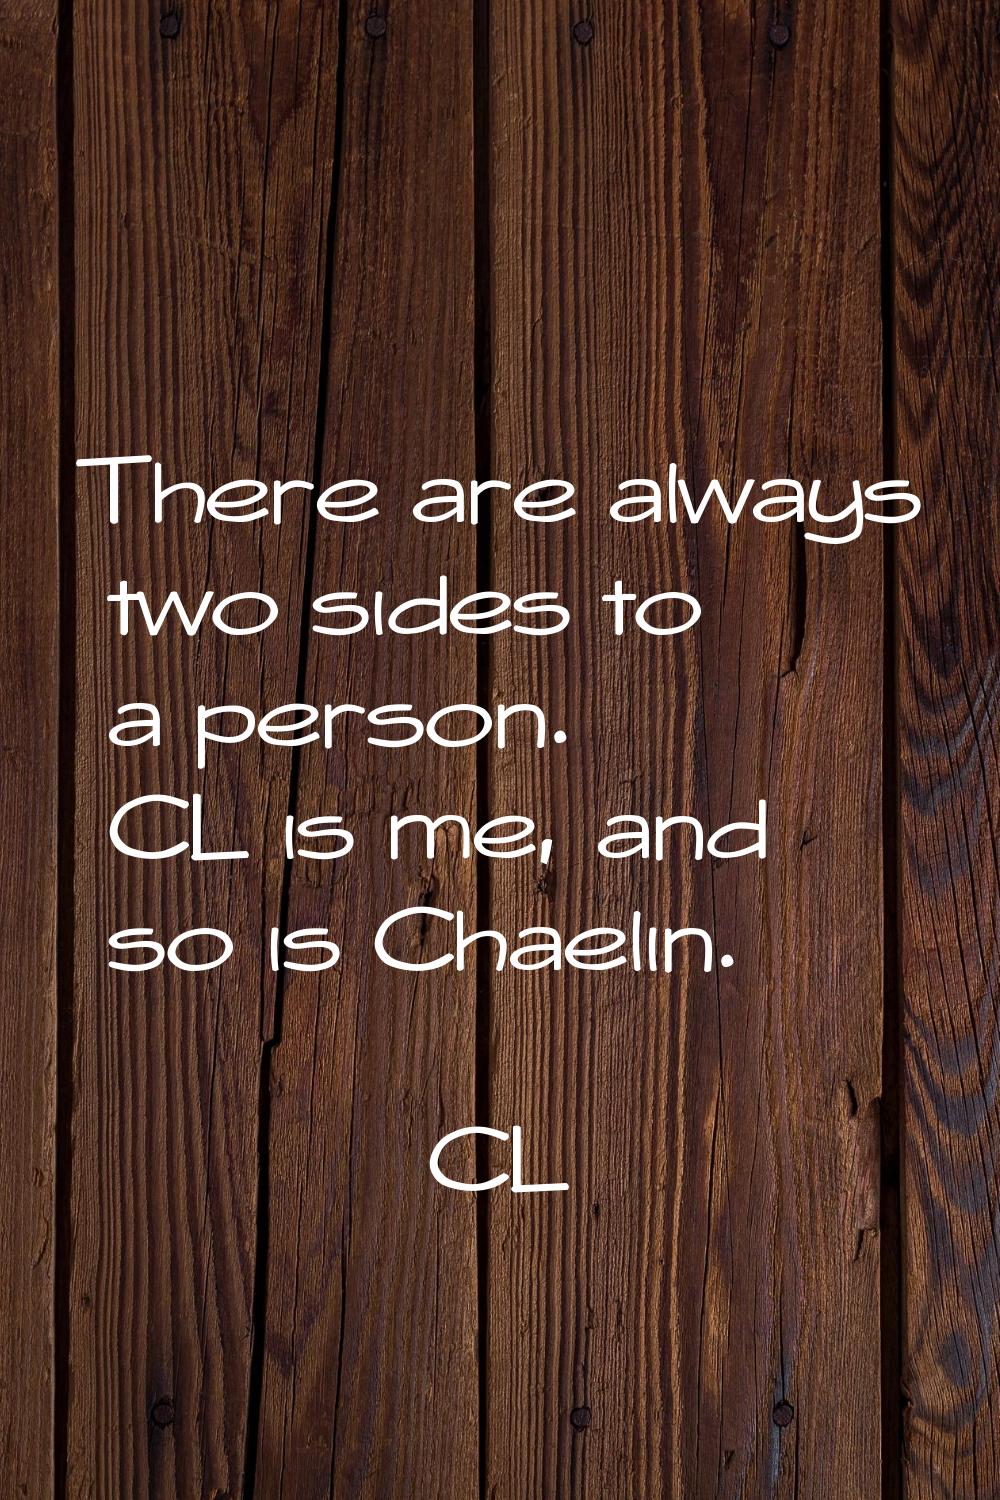 There are always two sides to a person. CL is me, and so is Chaelin.